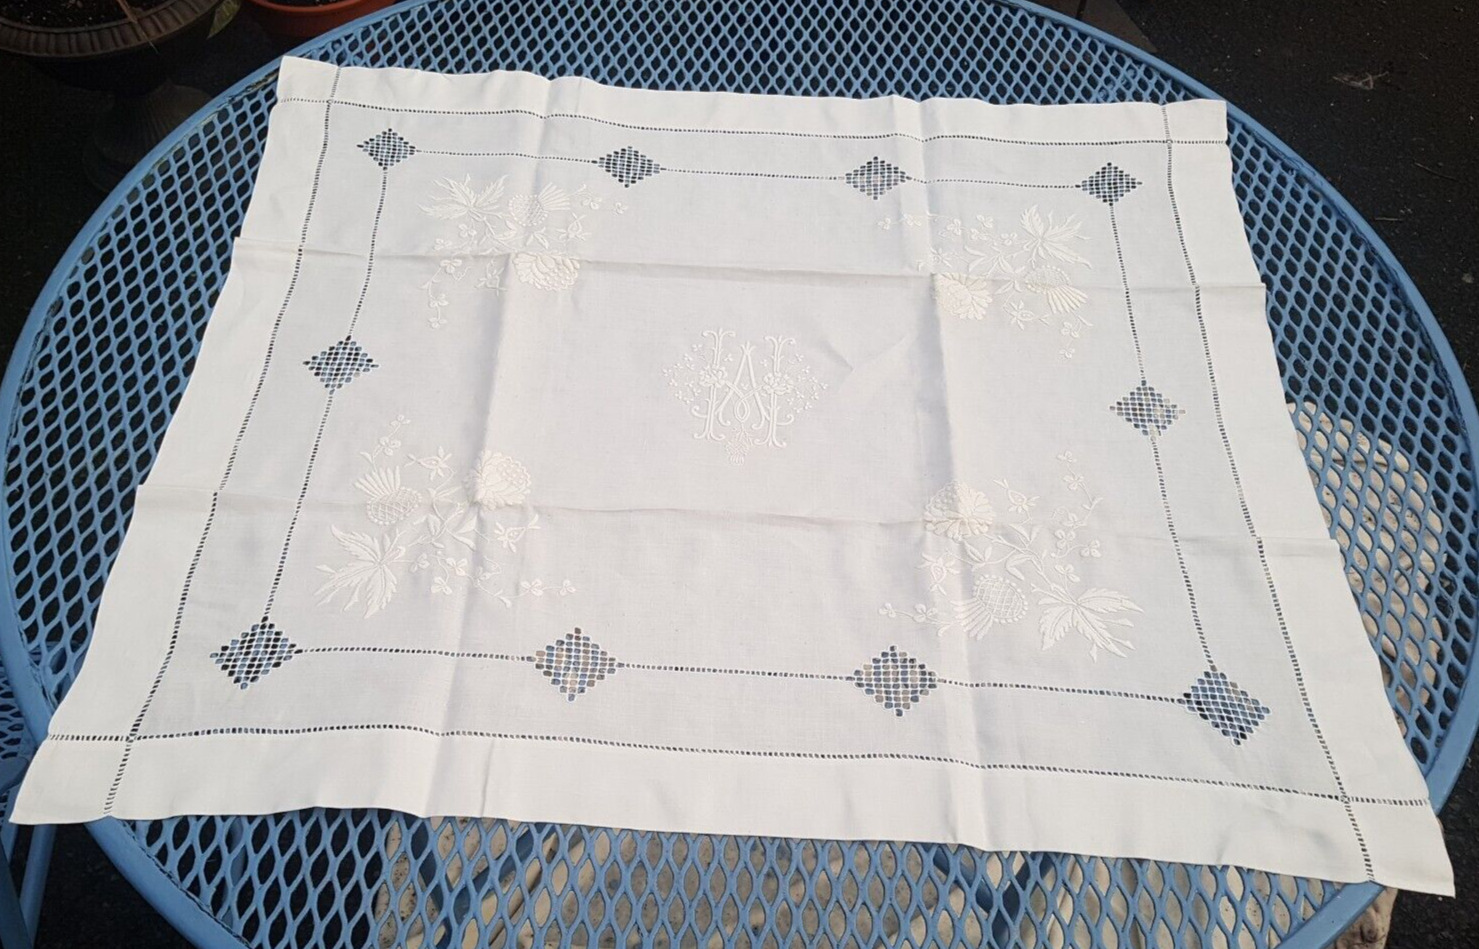 27 x 32 in antique Irish linen tablecloth white shamrocks thistles embroidery